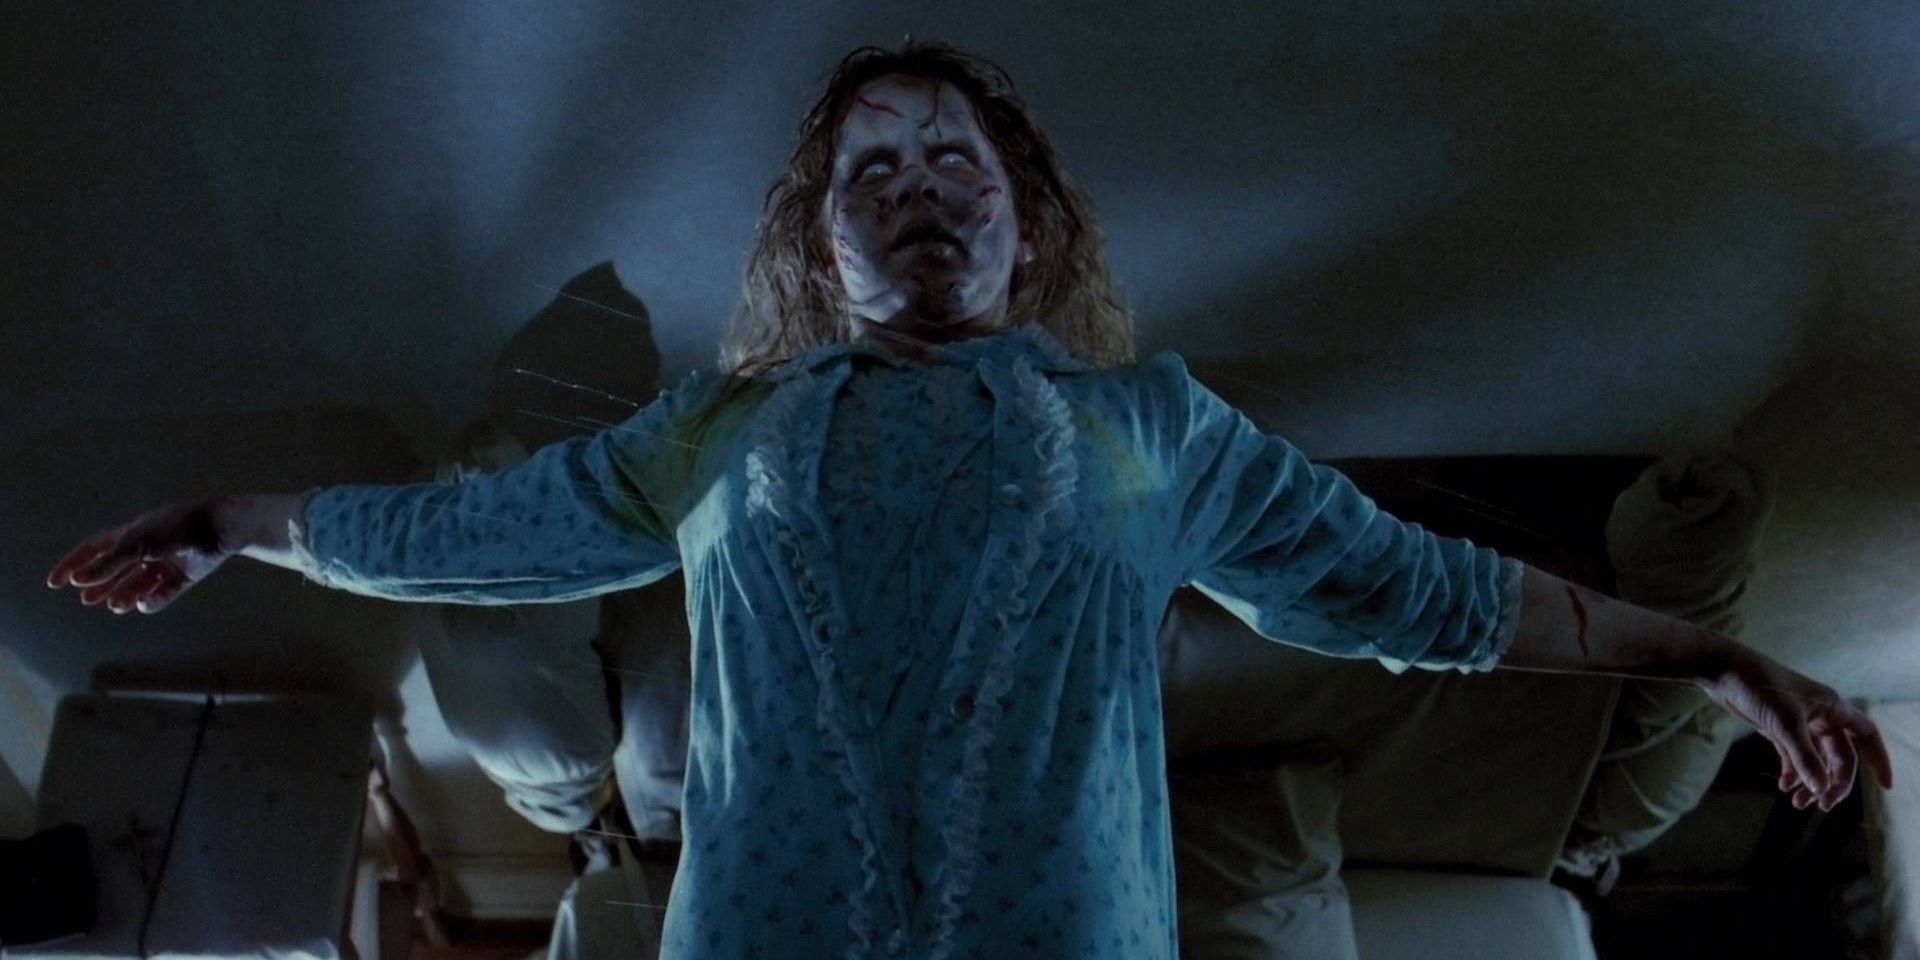 Regan rises over the bed in The Exorcist